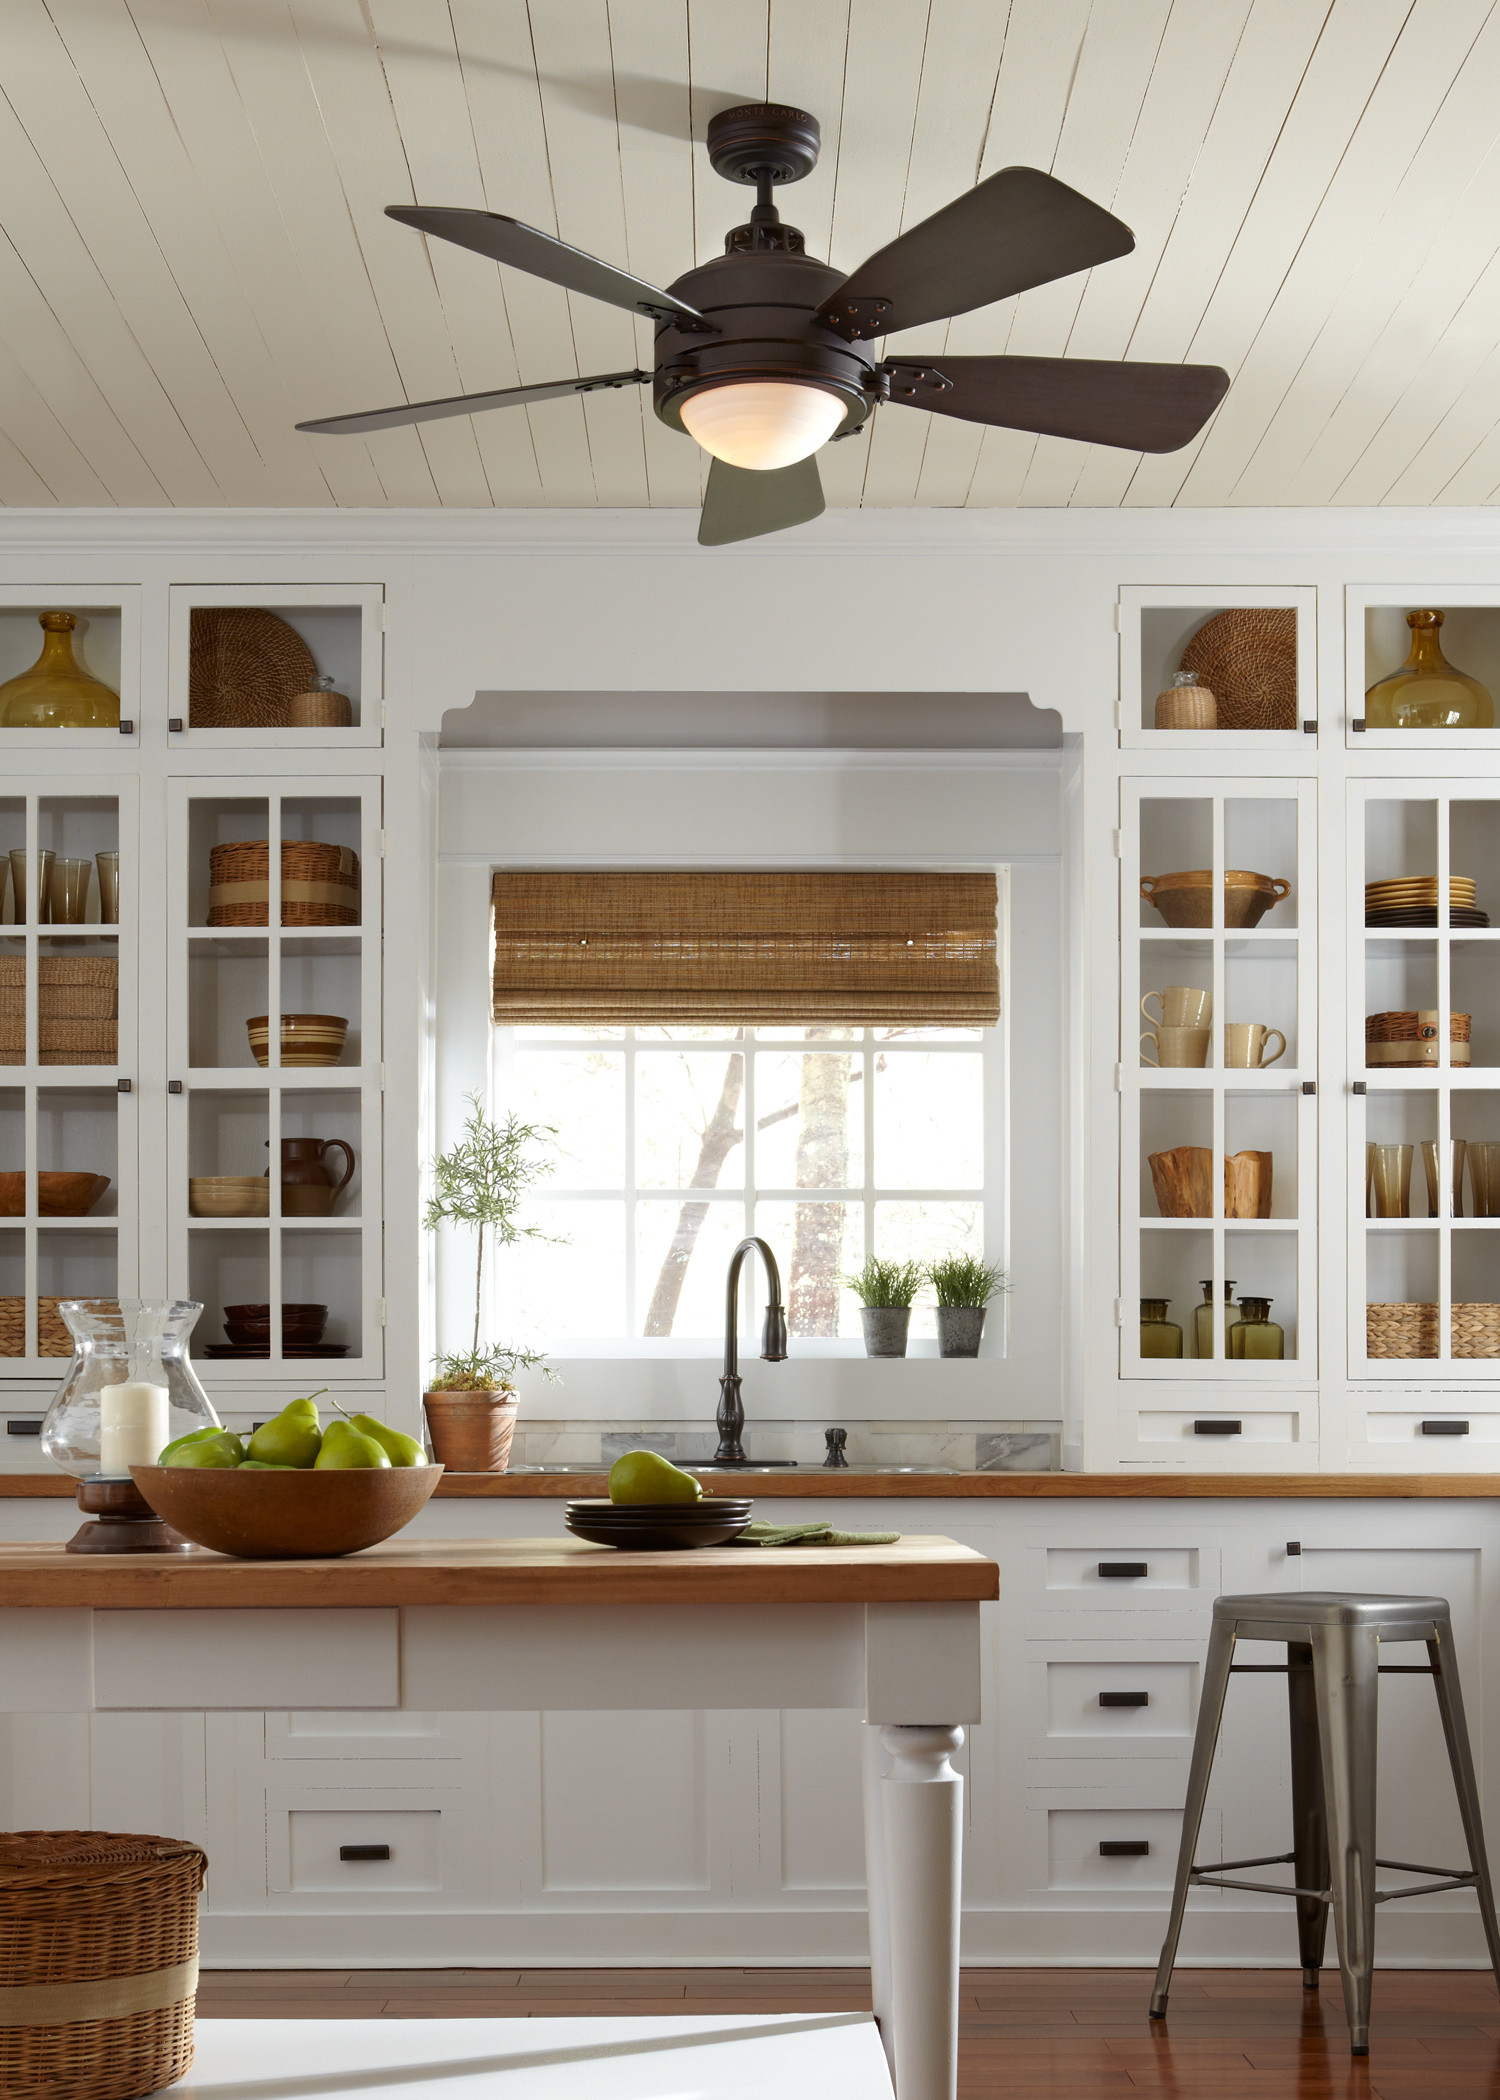 Small Fan For Kitchen
 10 Tips To Help You Get the Right Ceiling fan for kitchen